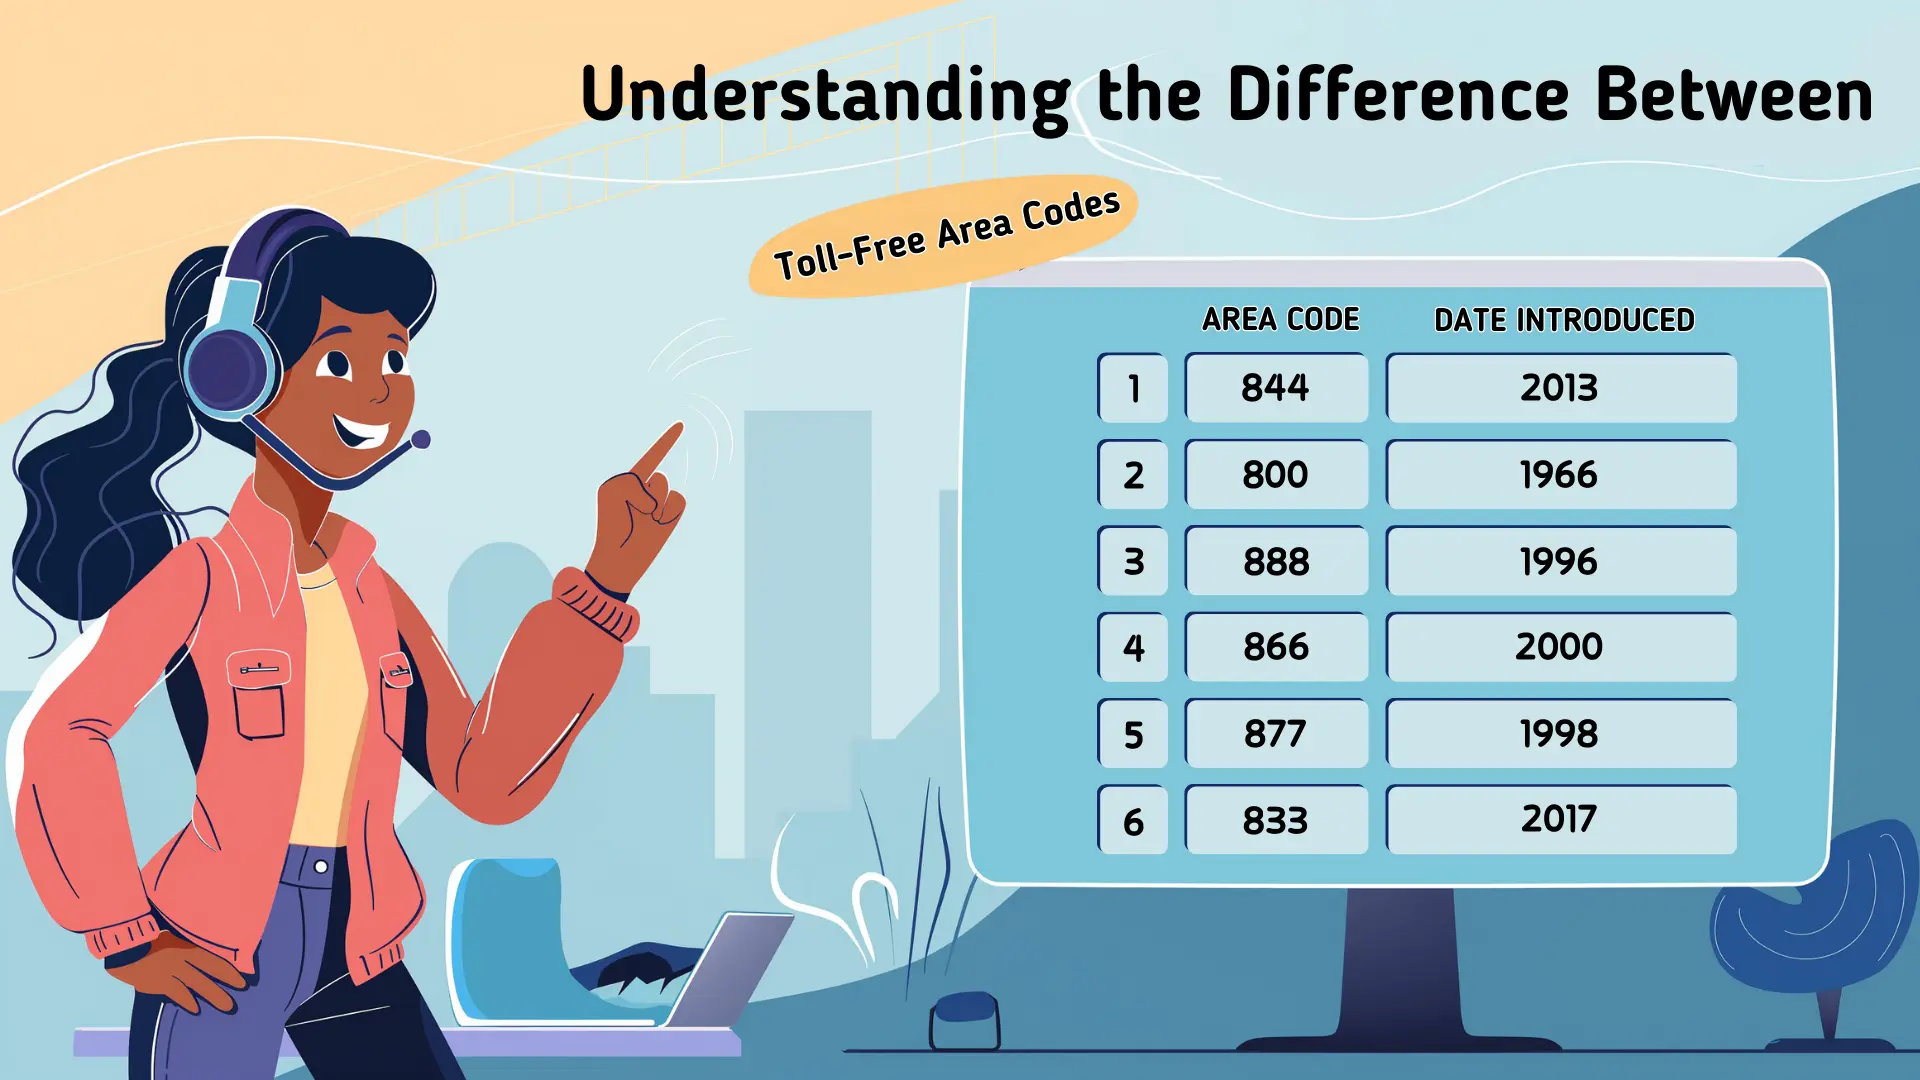 Understanding the Difference Between Toll-Free Area Codes